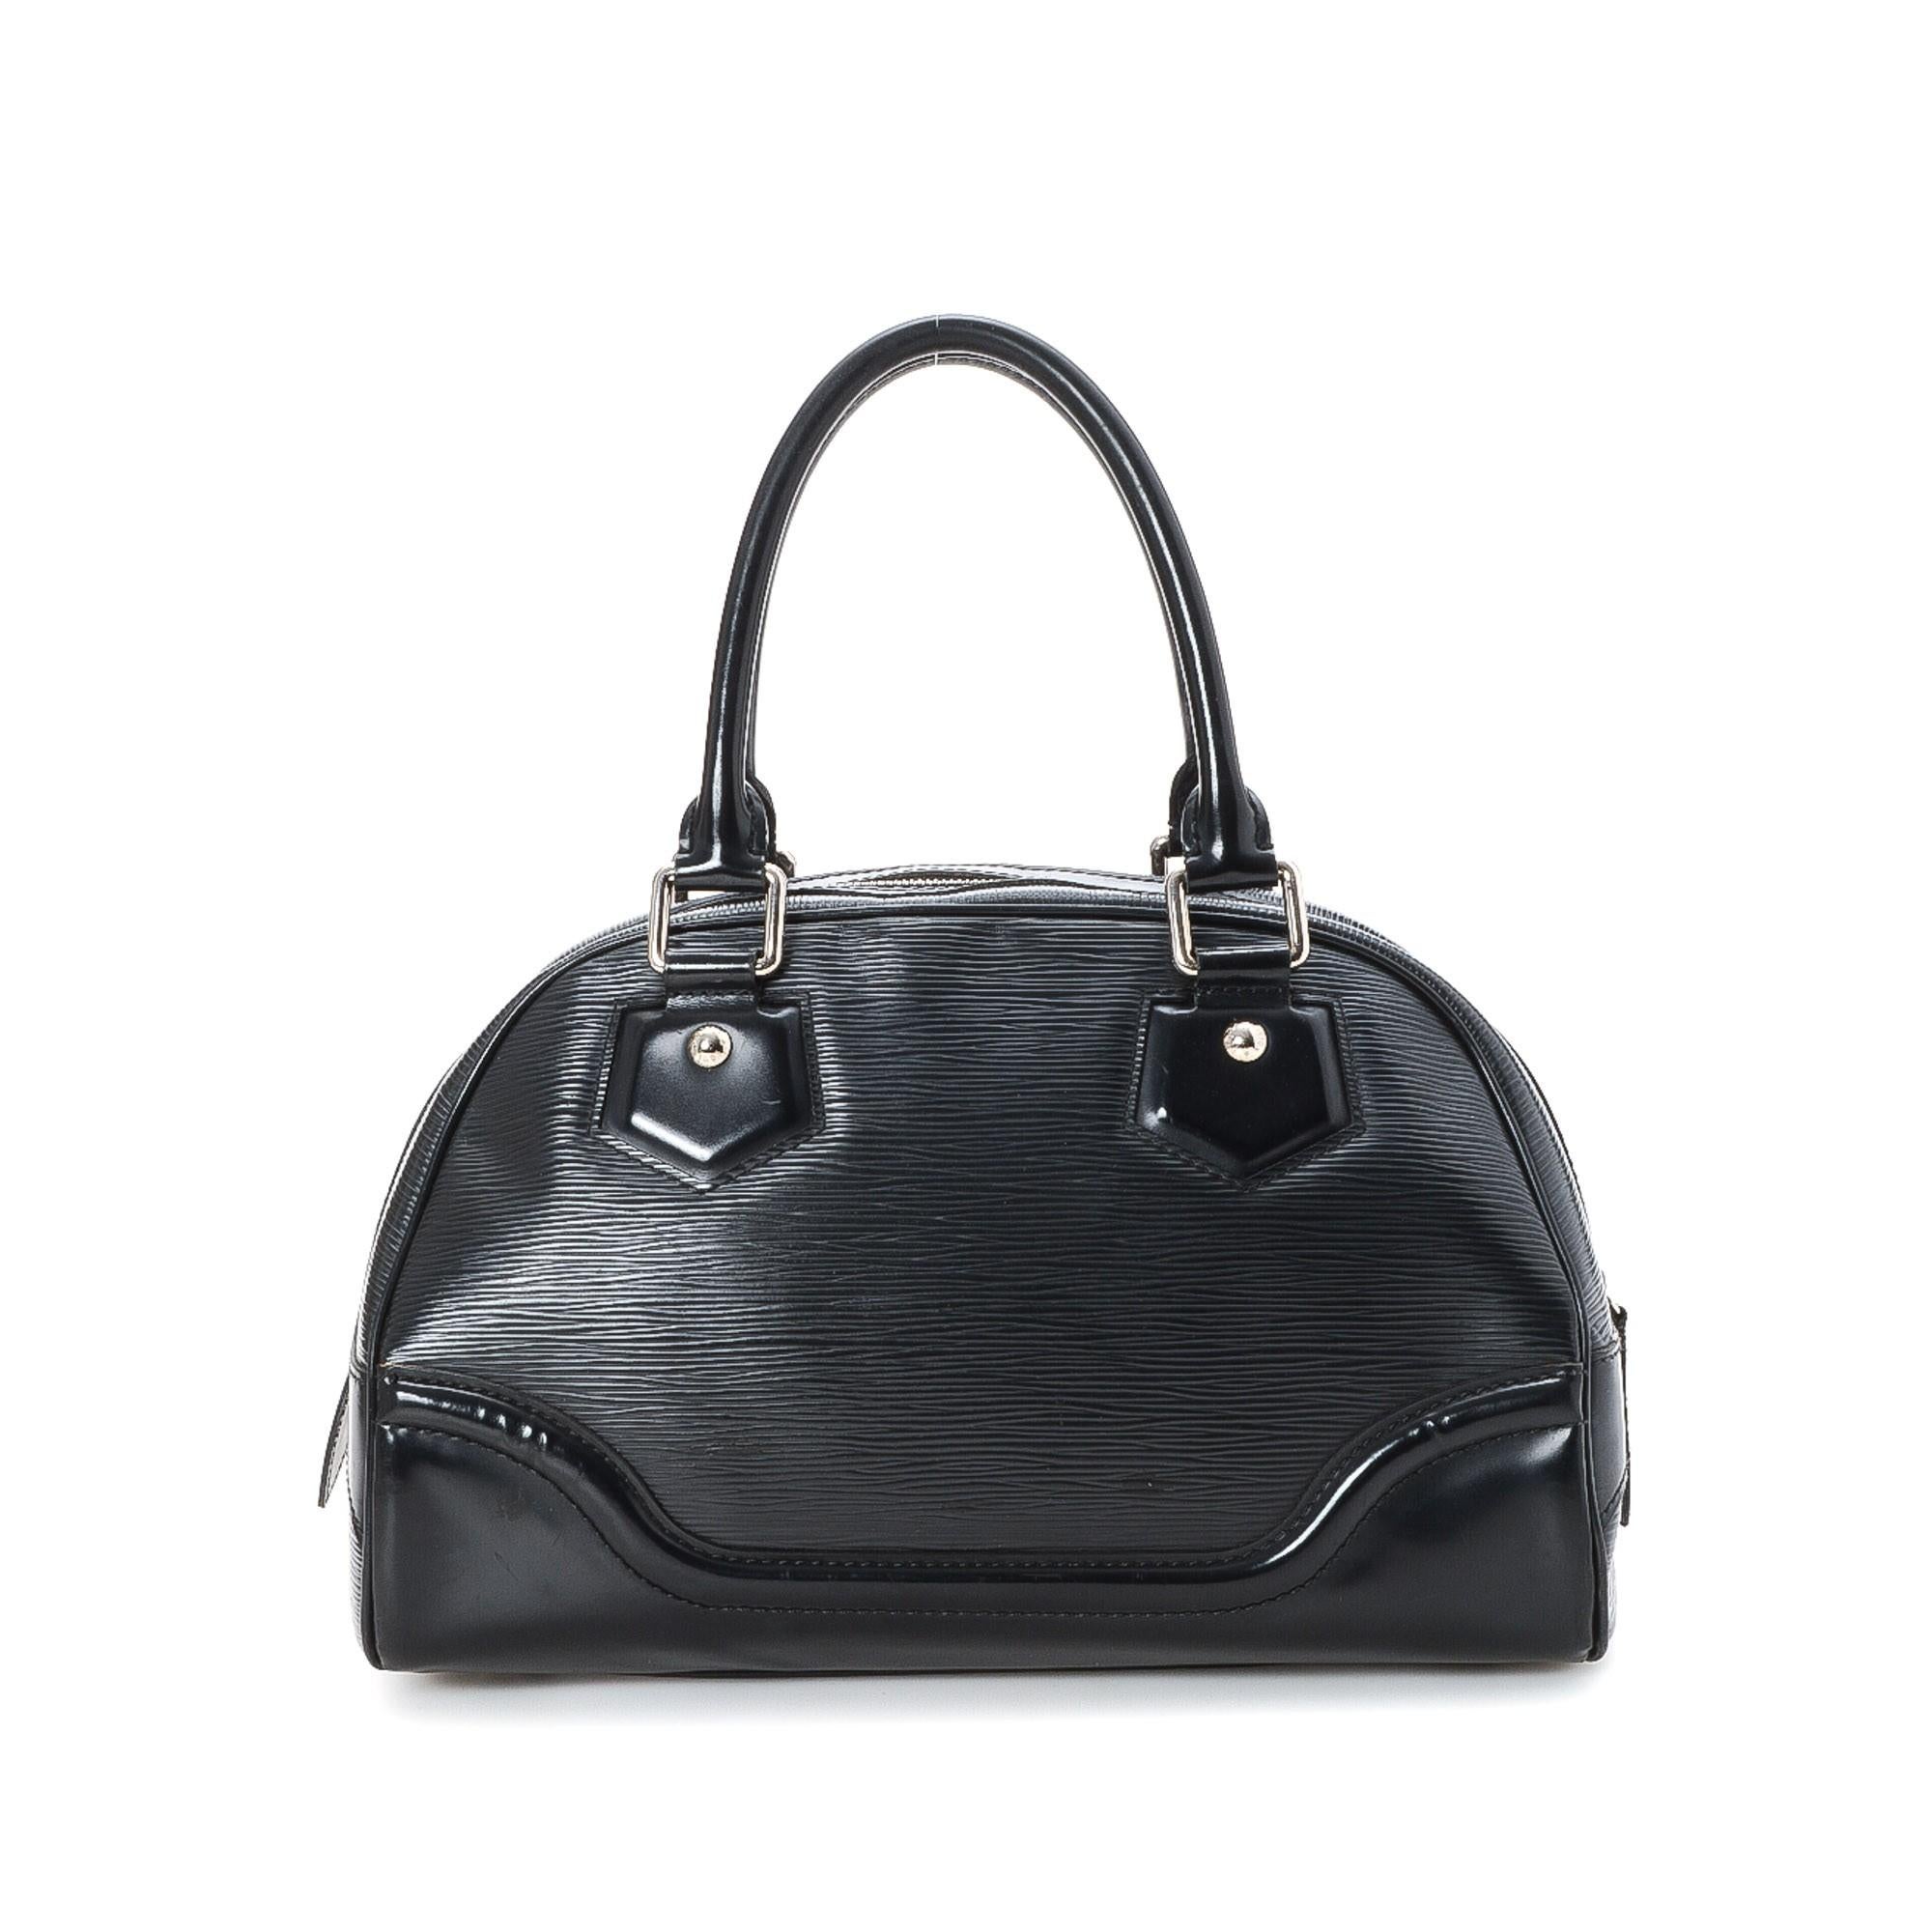 Louis Vuitton Black Epi Leather Bowling Montaigne PM Handbag In Good Condition For Sale In Irvine, CA